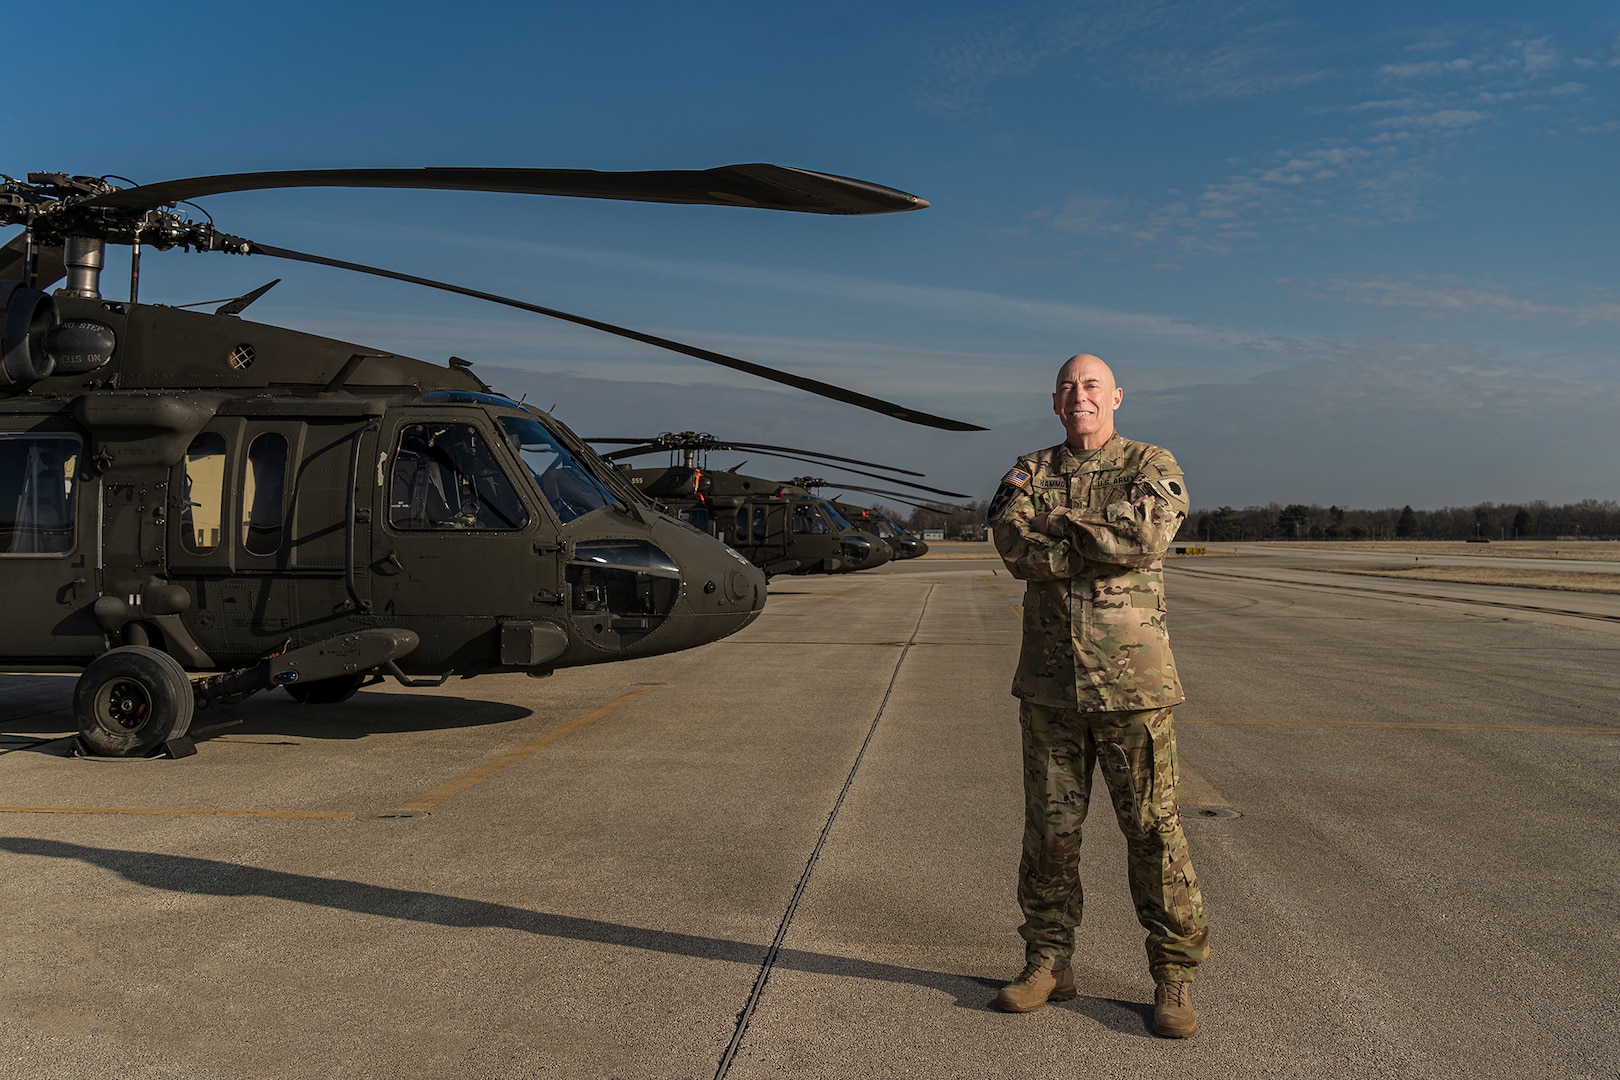 Chief Warrant Officer (5) David Hammon, of Sherman, Illinois, Command Chief Warrant Officer of the Illinois National Guard, poses for a photo prior his final flight as a Black Hawk pilot on March 15 at the Decatur, Illinois Aviation Facility. Hammon retires from the Illinois Army National Guard April 30 after a 42 year career.